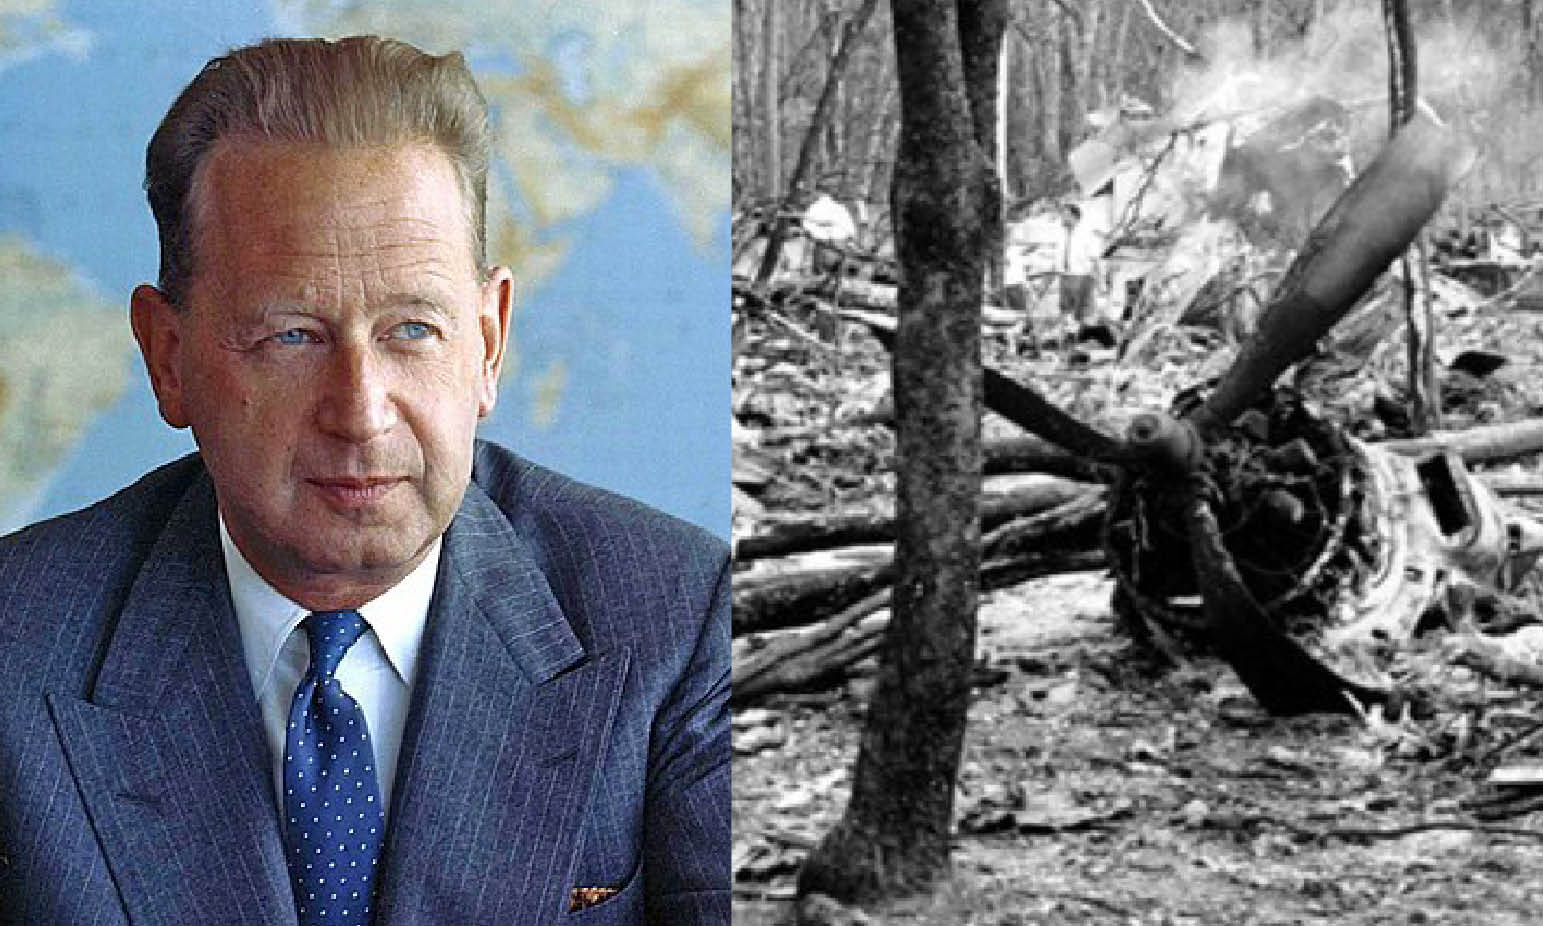 “THE UN SECRETARY GENERAL KILLING”: AFTER 58 YEARS THE BRITISH 007 CONCEAL THE DOSSIER